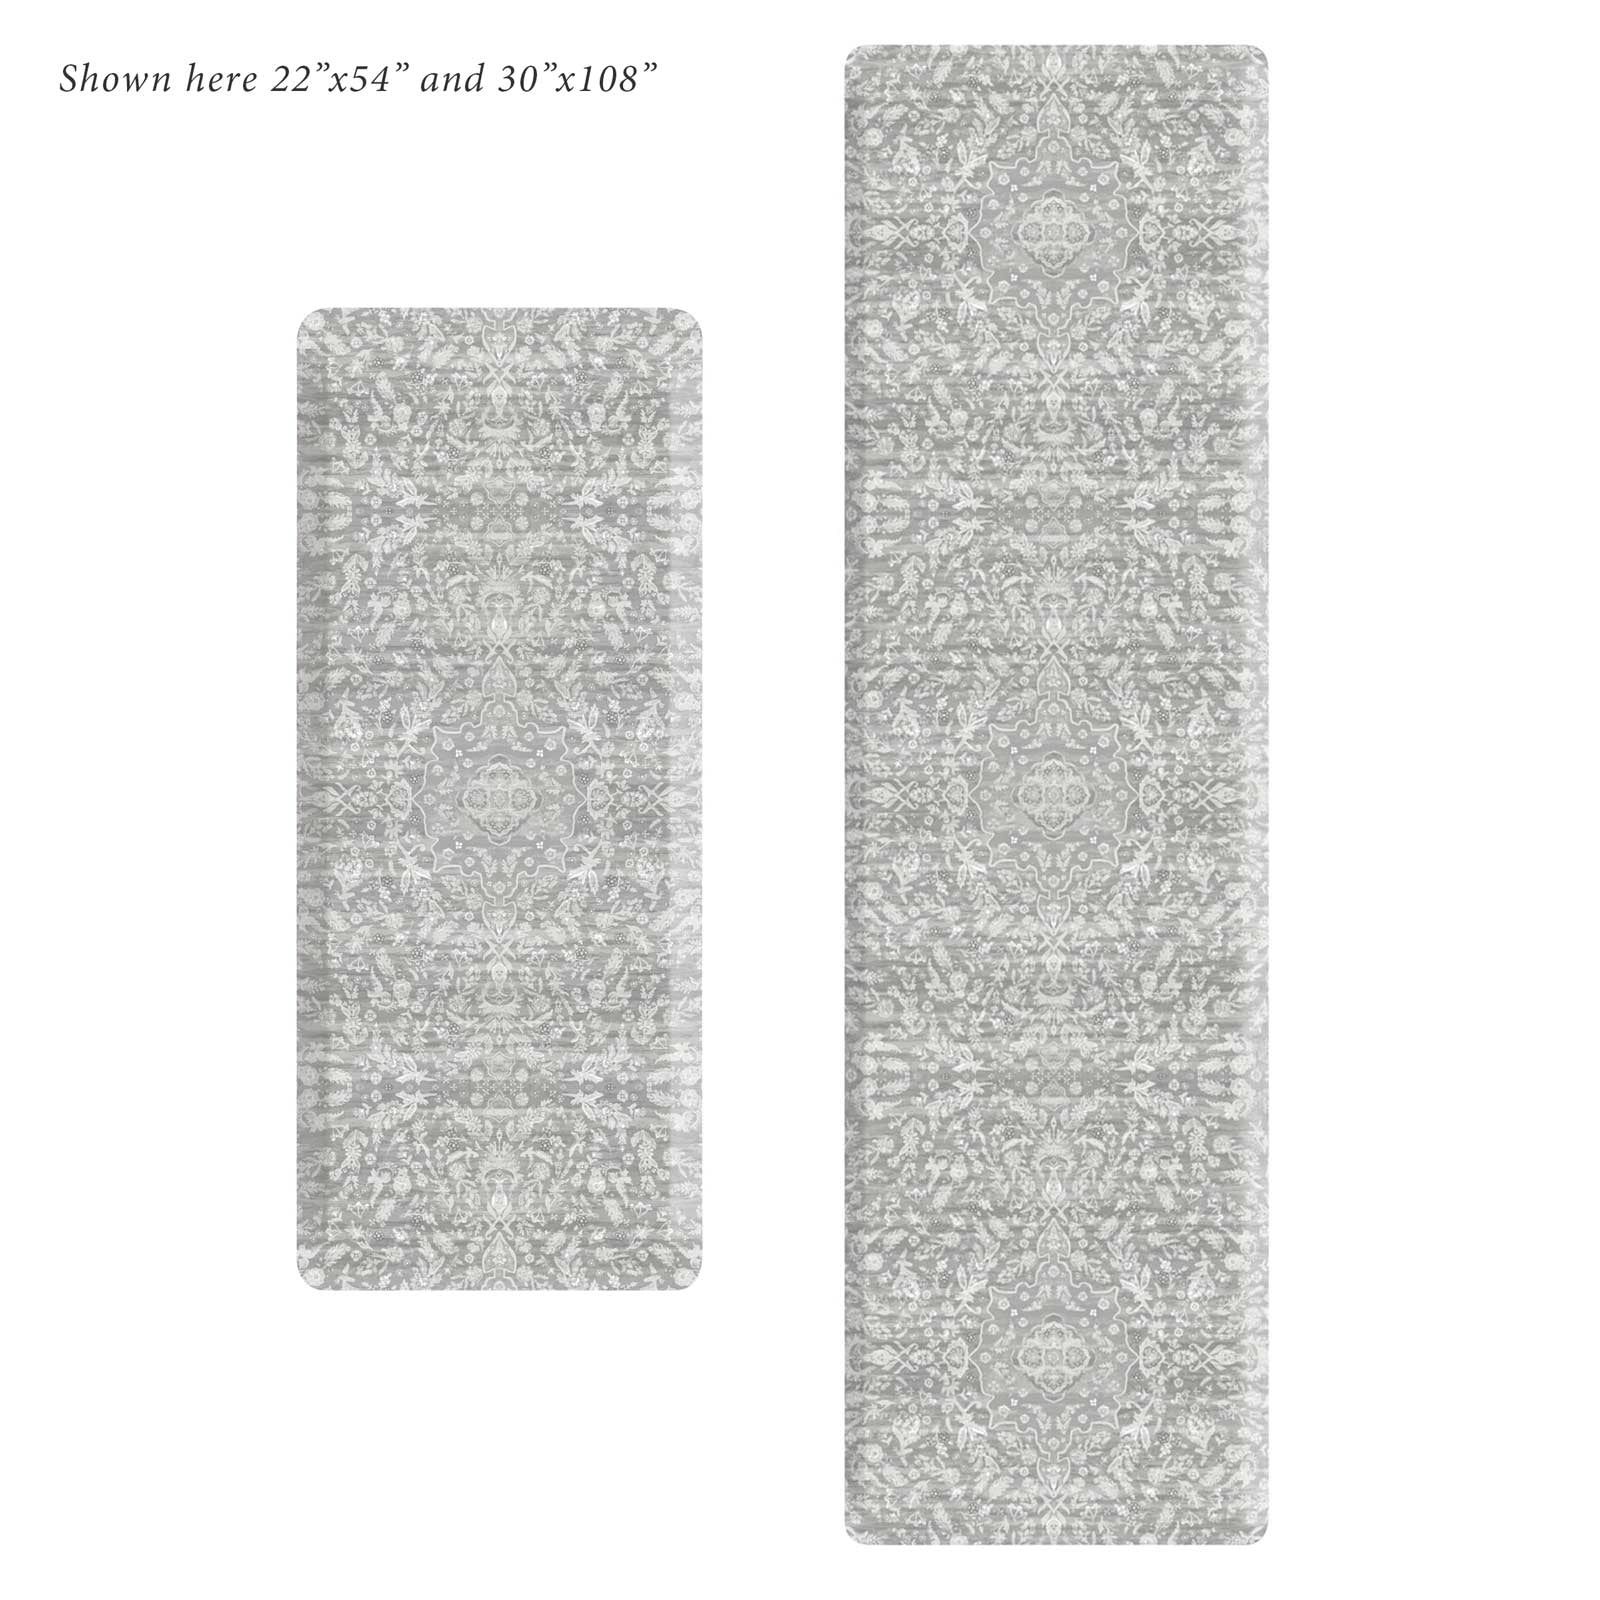 Emile earl grey gray and cream floral standing mat shown in sizes 22x54 and 30x108